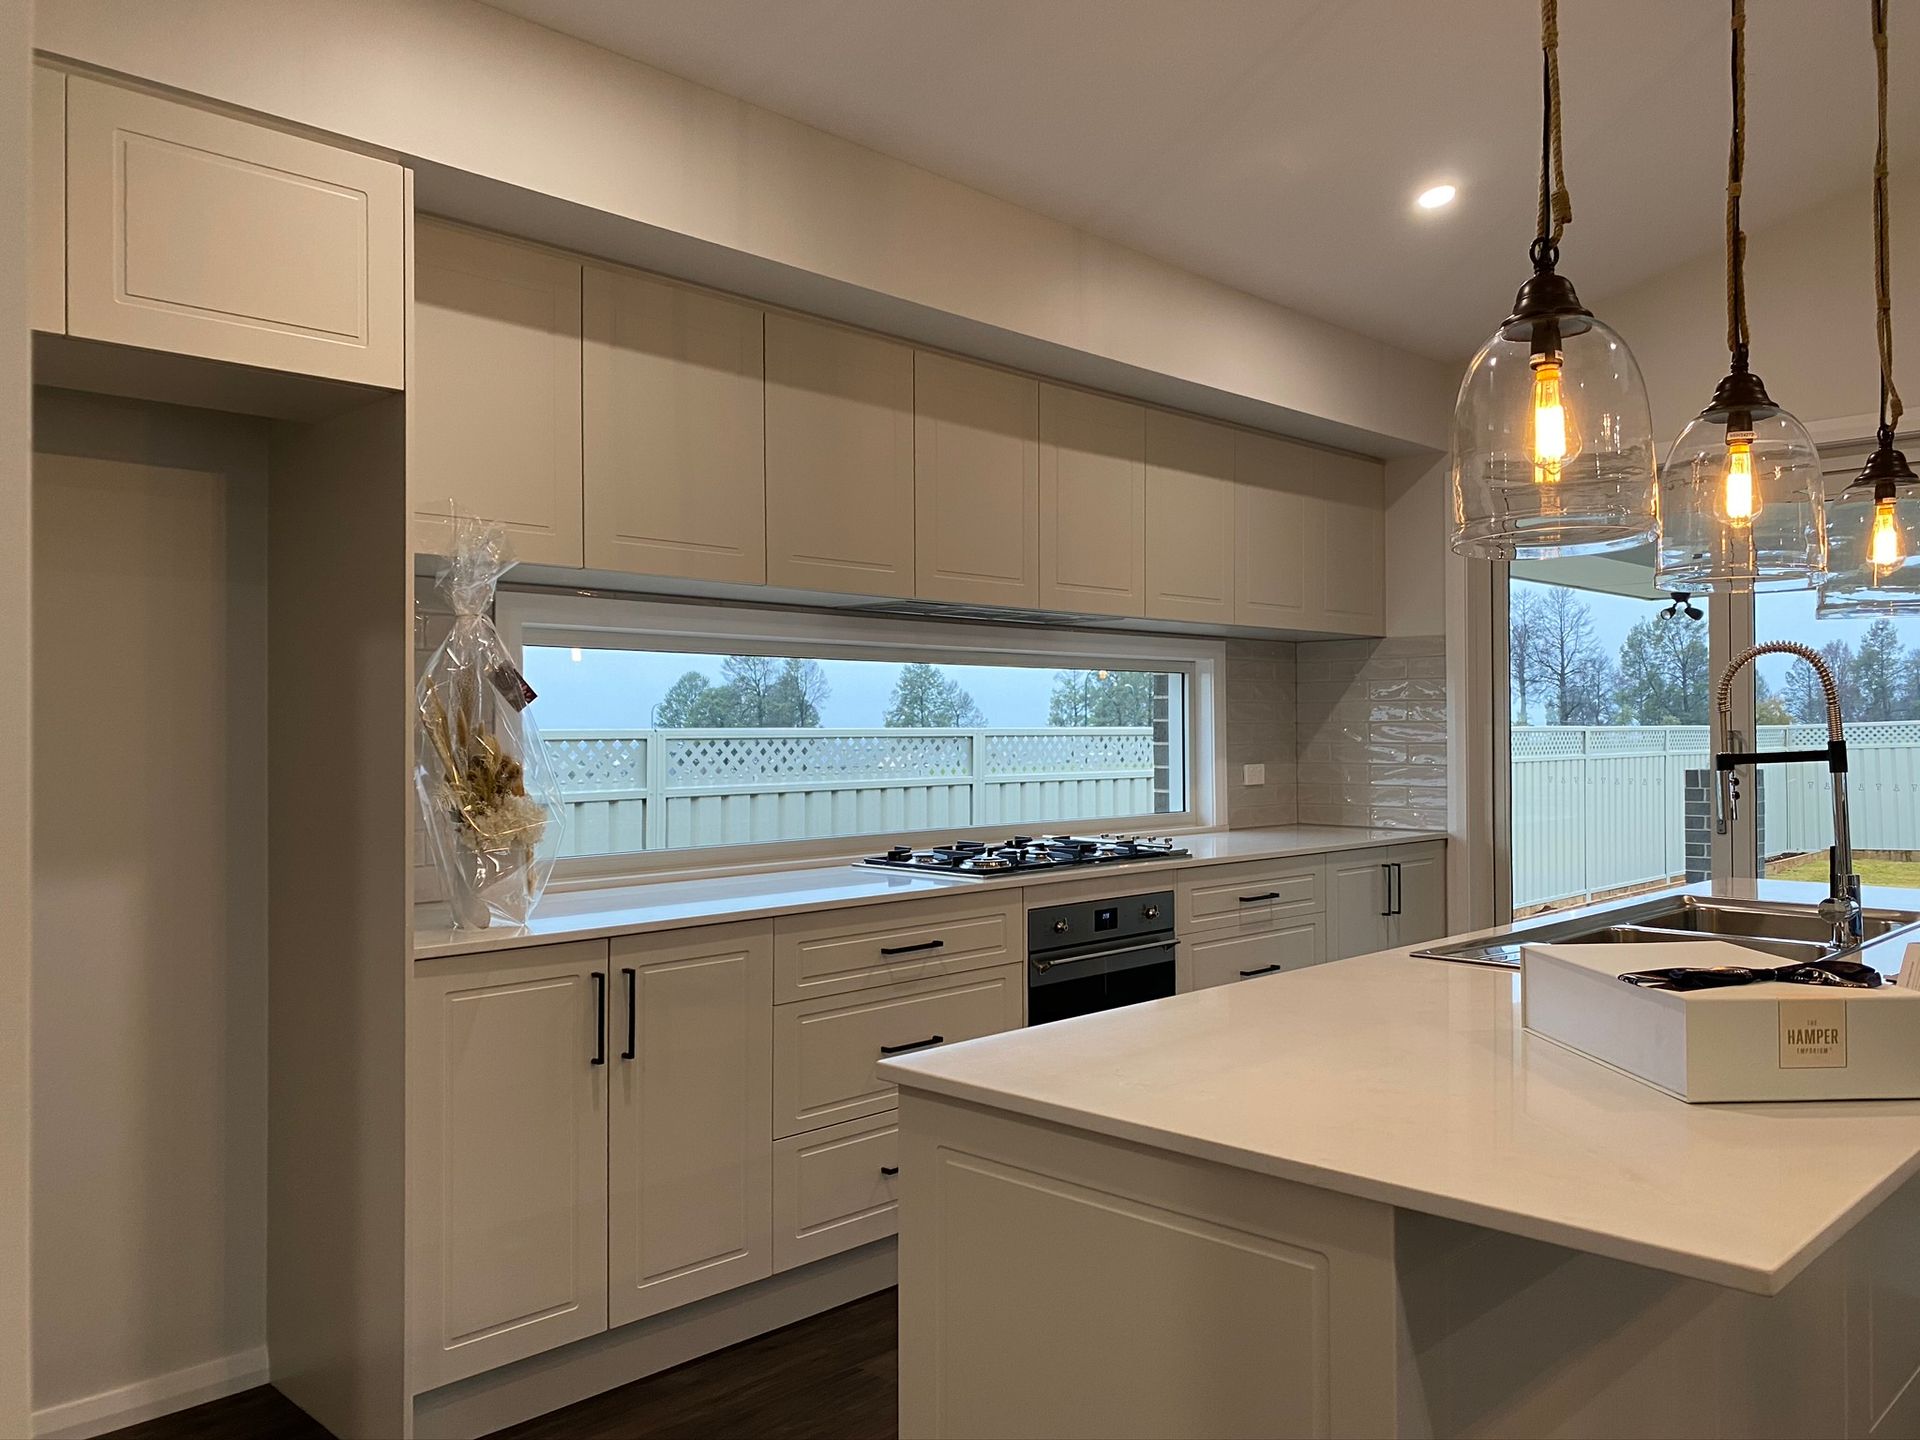 New Build Kitchen With Beautiful Lights — Kitchen Renovations in Dubbo, QLD